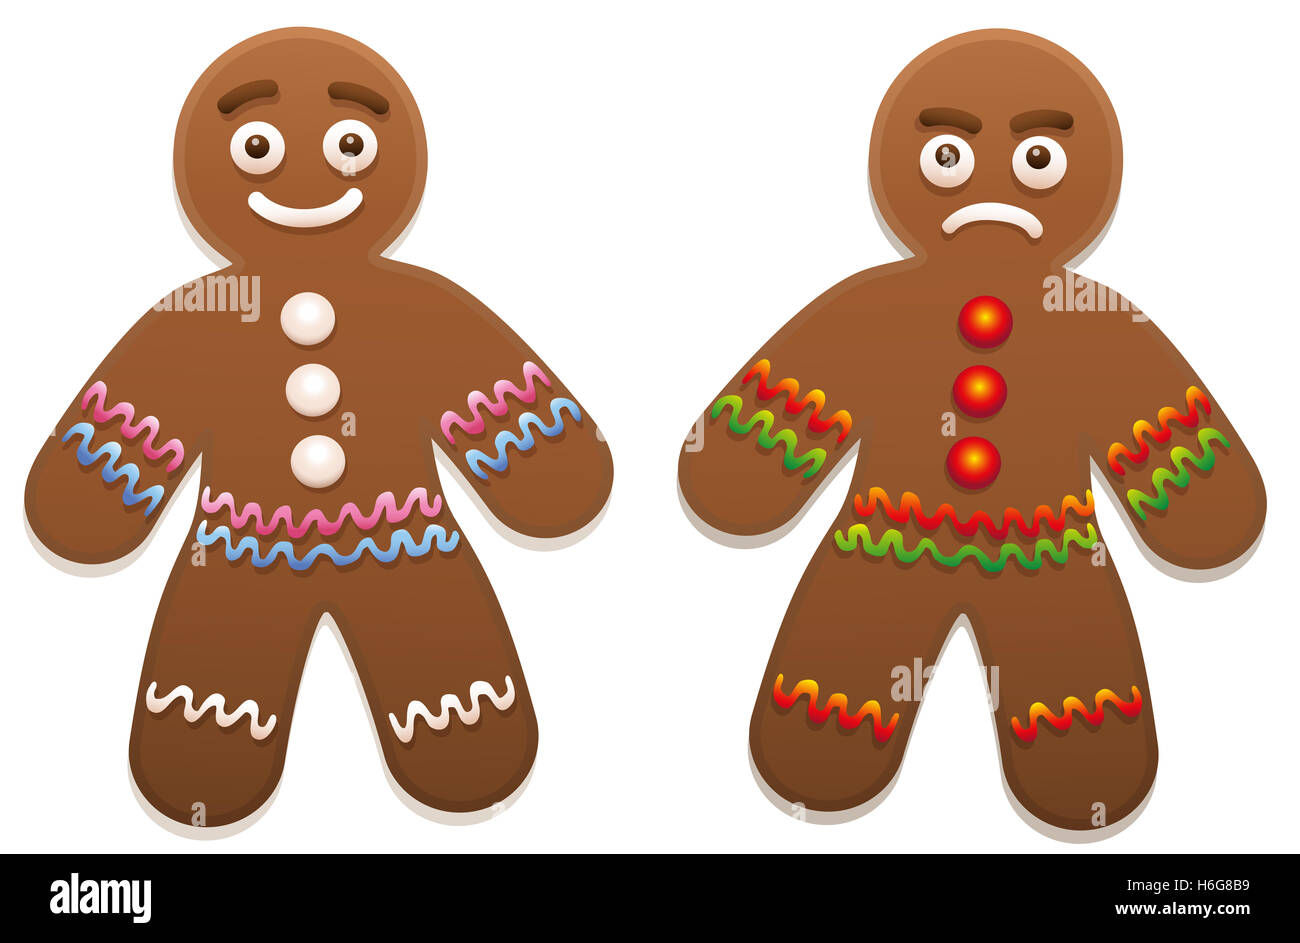 Gingerbread man - one is happy, the other is angry. Stock Photo